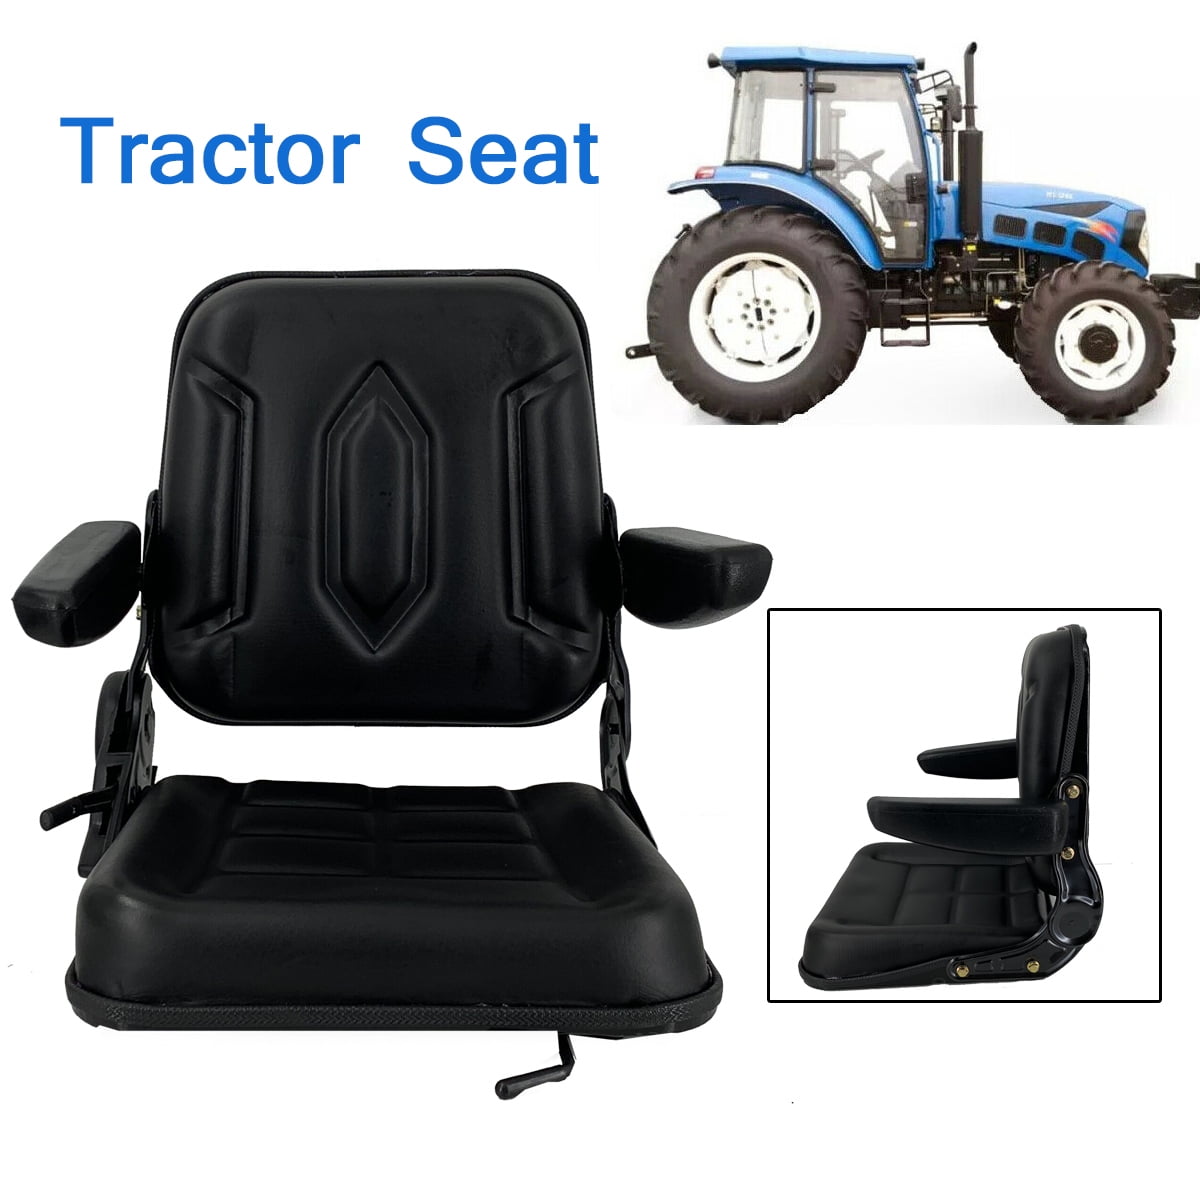 Universal Tractor Seat Mower Digger Forklift Dumper Chair Suspension Seat 